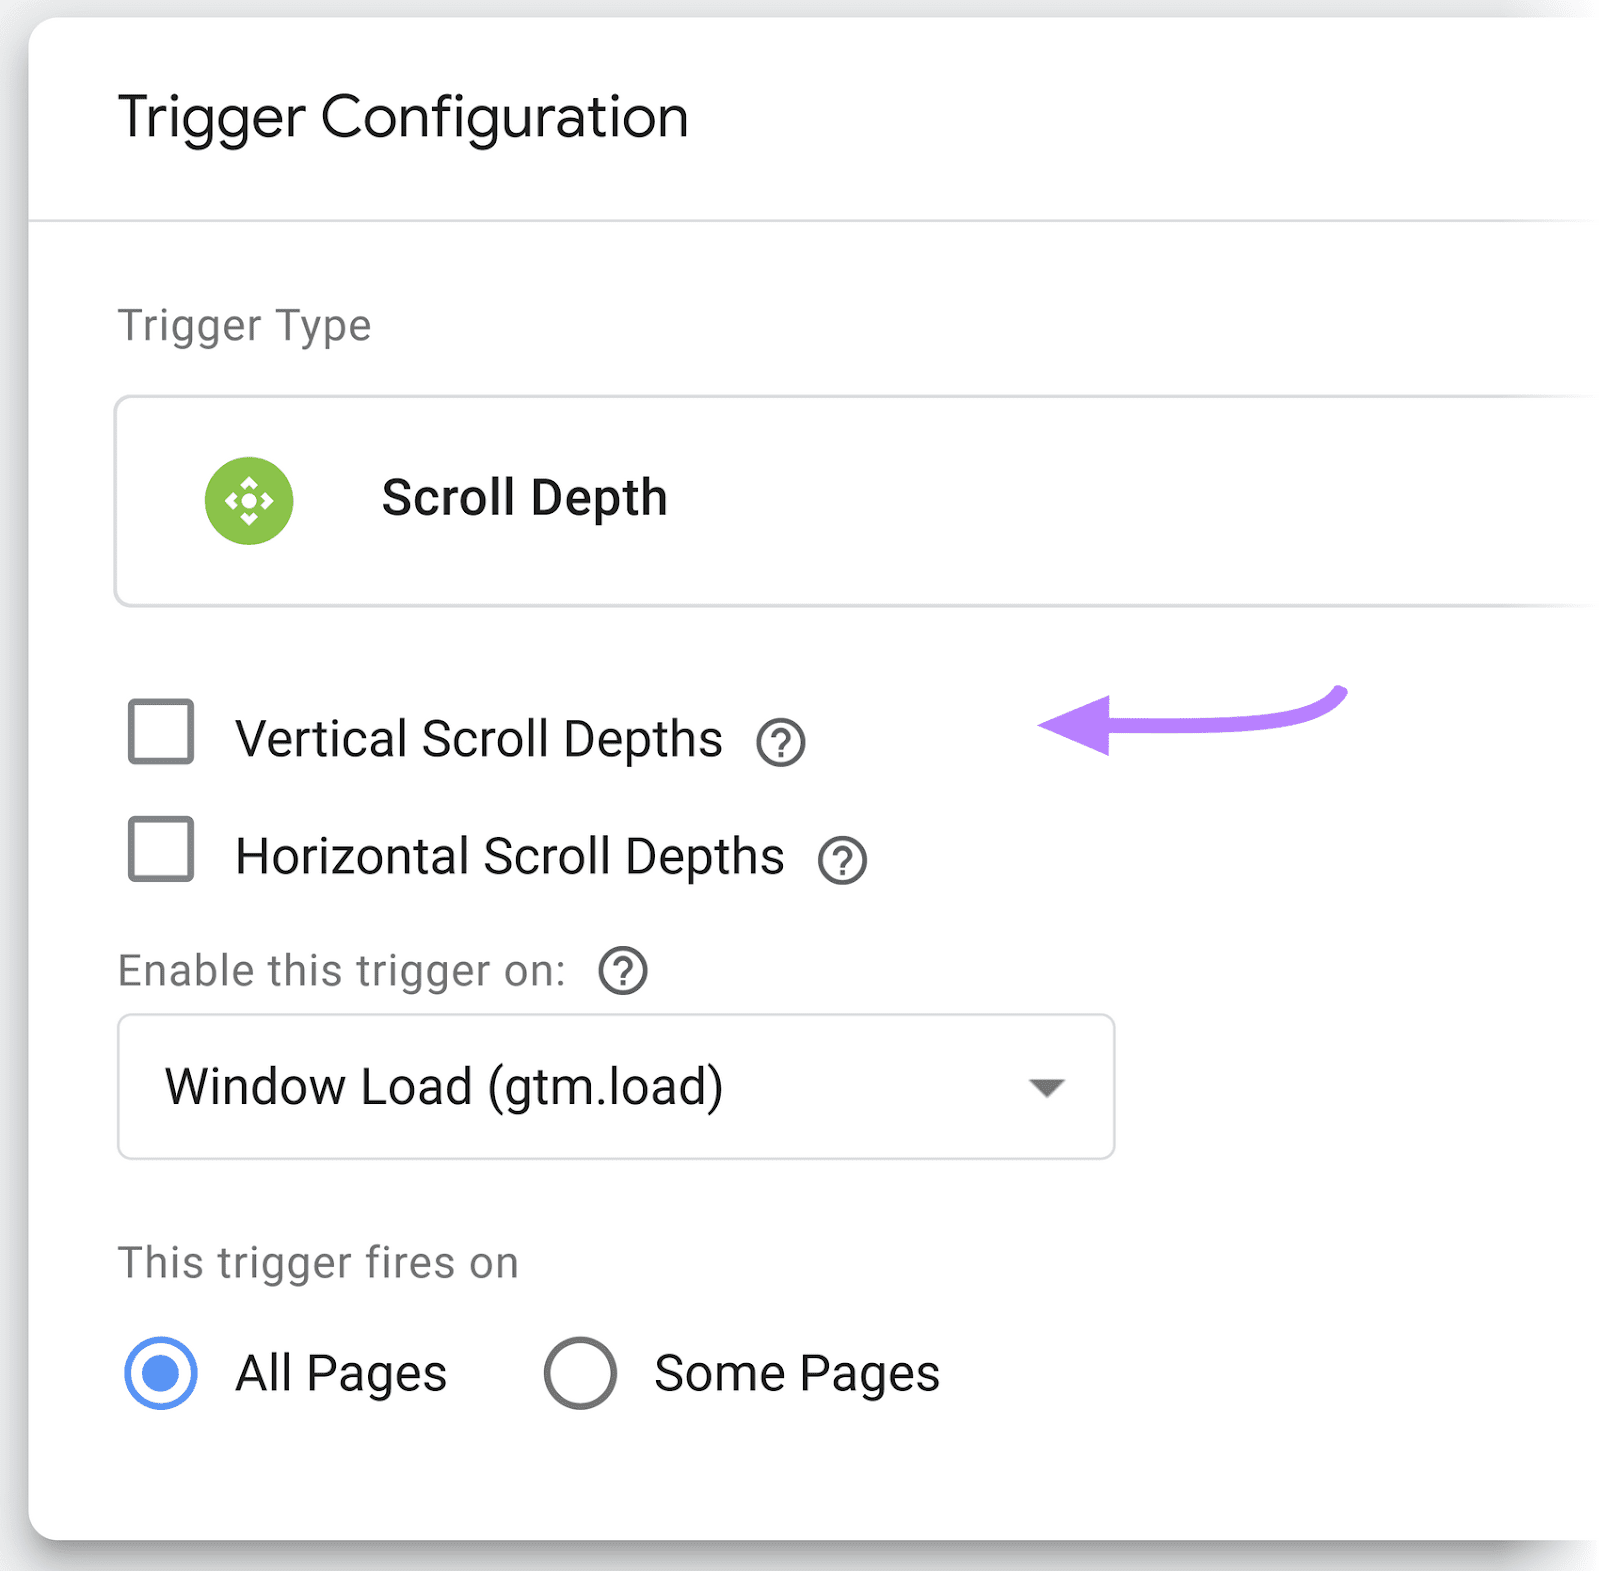 An arrow pointing to “Vertical Scroll Depths" checkbox nether  "Trigger Configuration" window